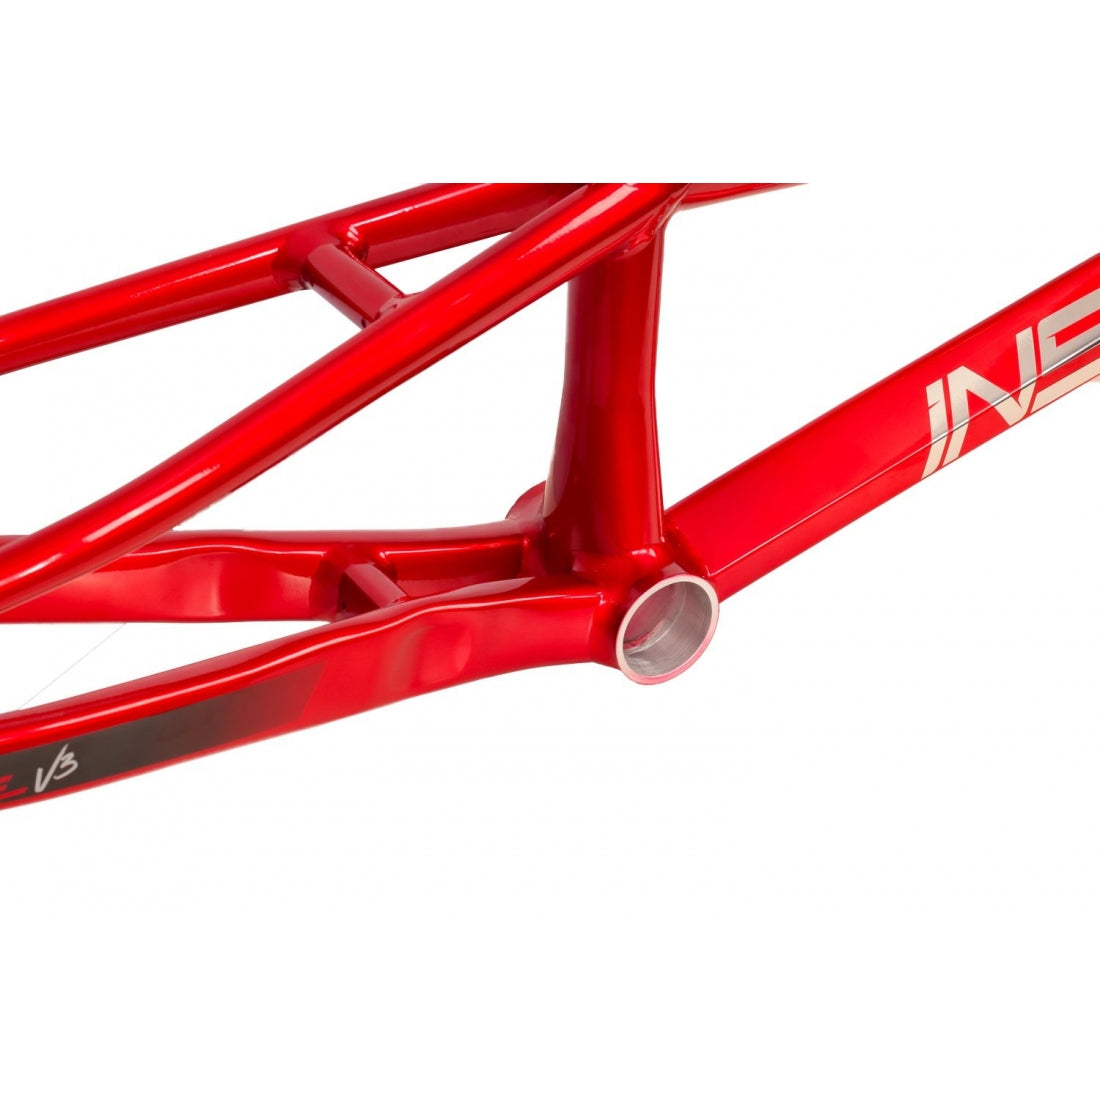 Close-up of a red Inspyre Concorde V3 Pro XXXL BMX Race frame showing the seat stays and part of the main triangle.